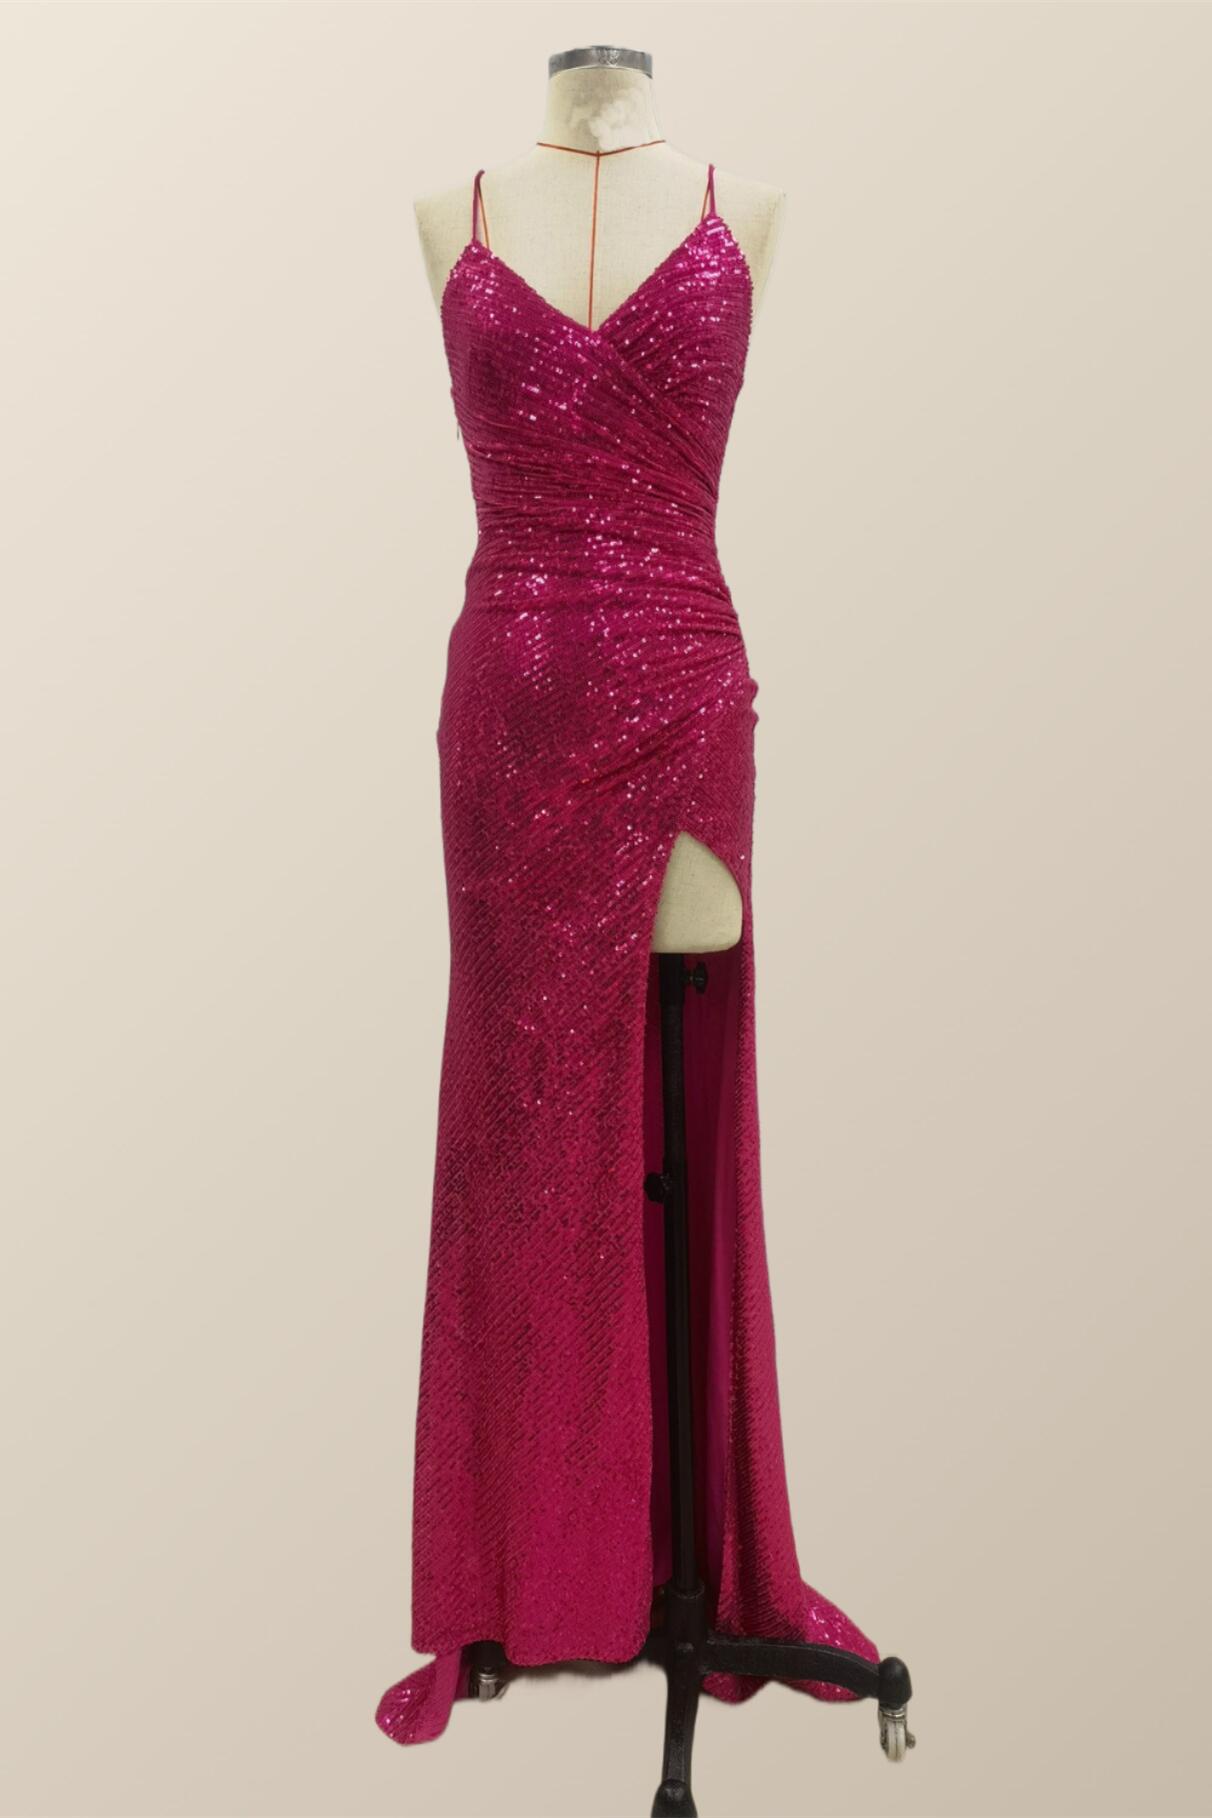 Fuchsia Sequin Mermaid Long Party Dress Outfits, Prom Dresses Designs